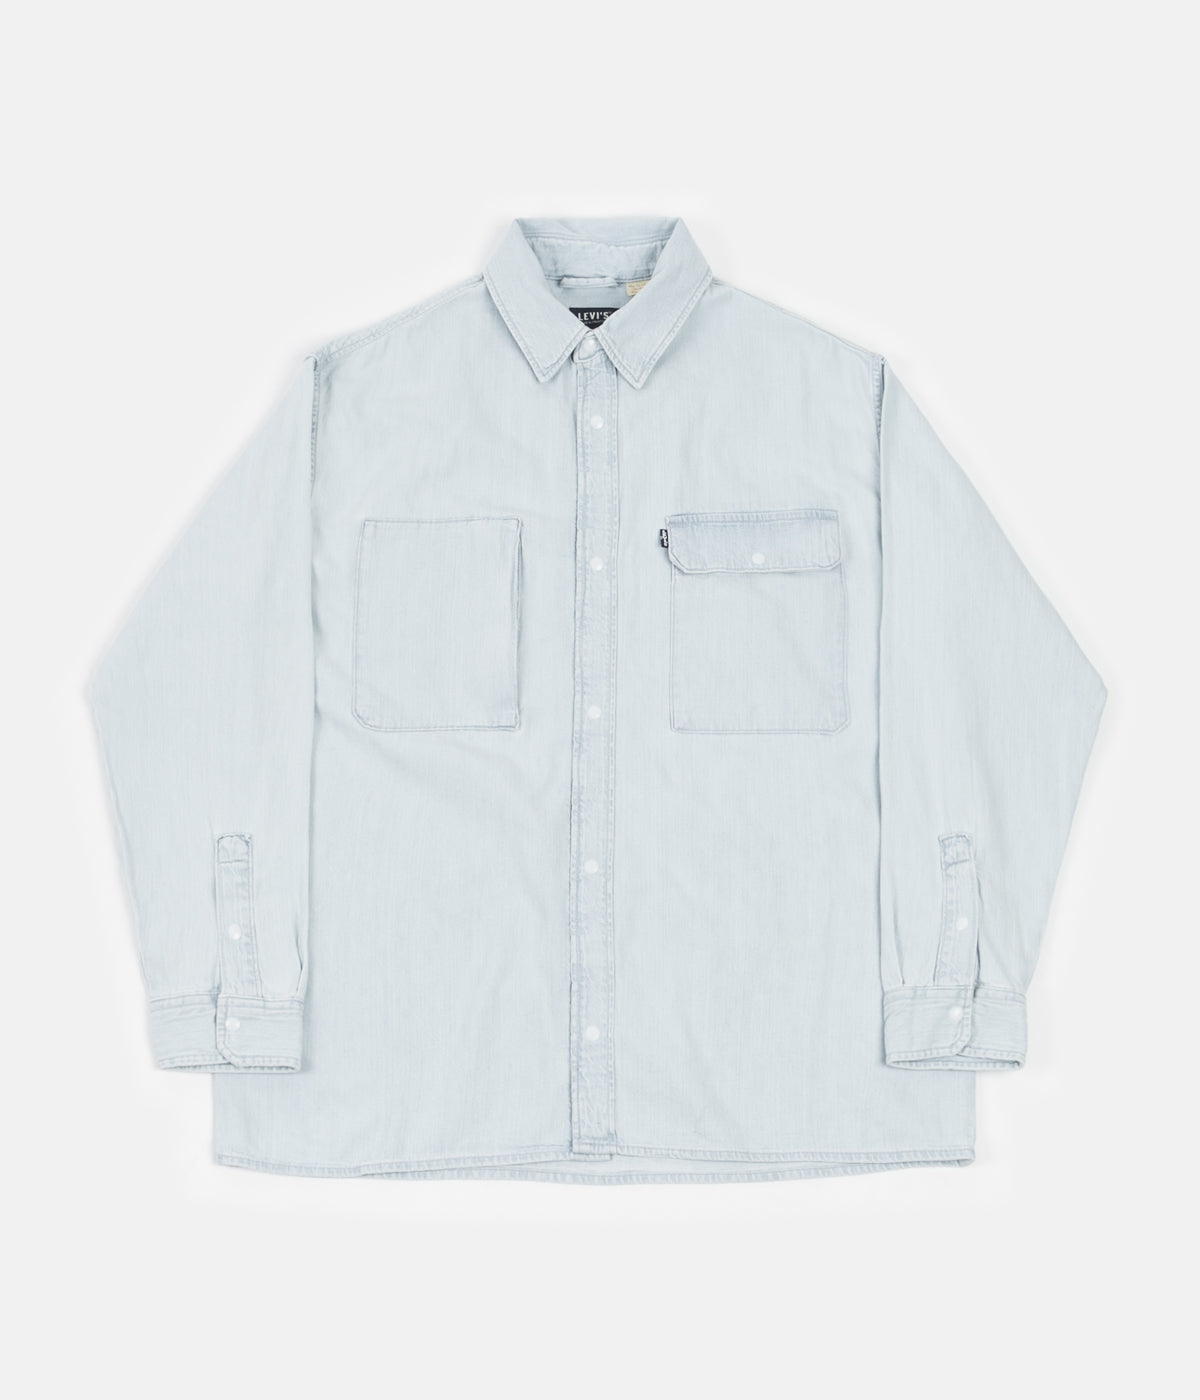 levis made and crafted shirt